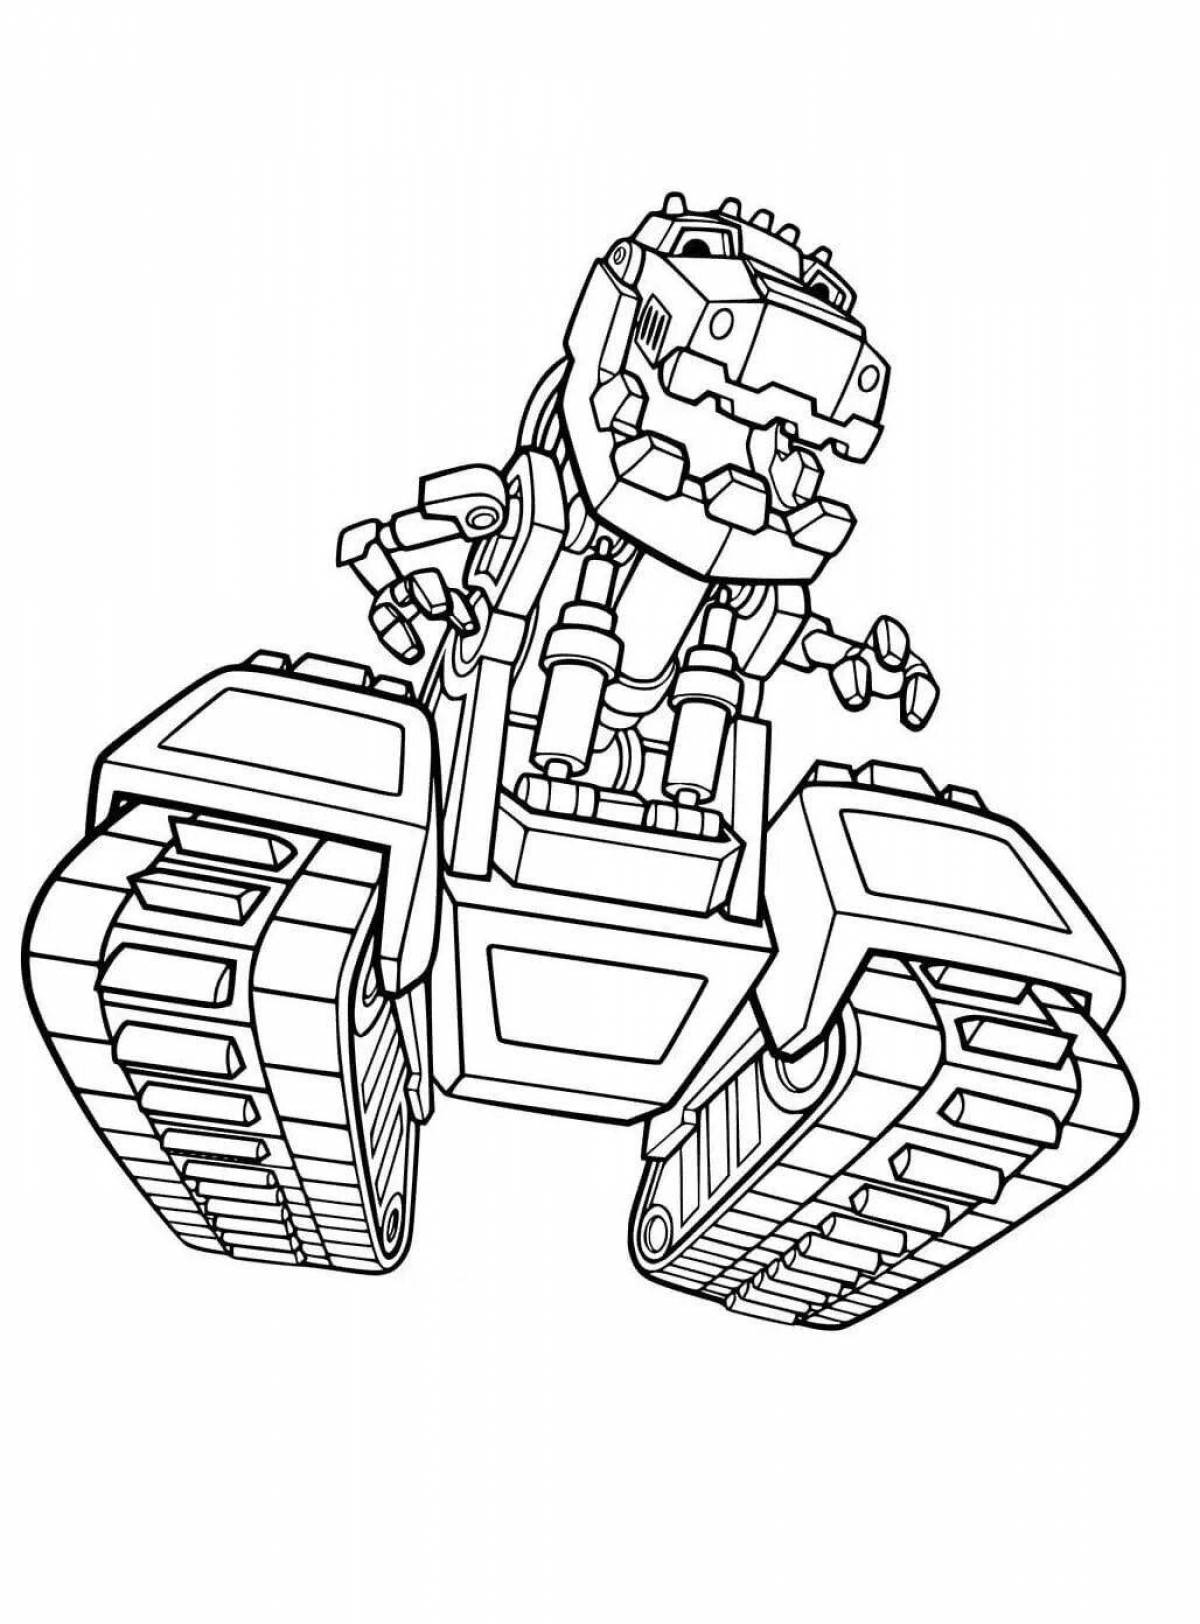 Awesome screamers coloring pages for boys